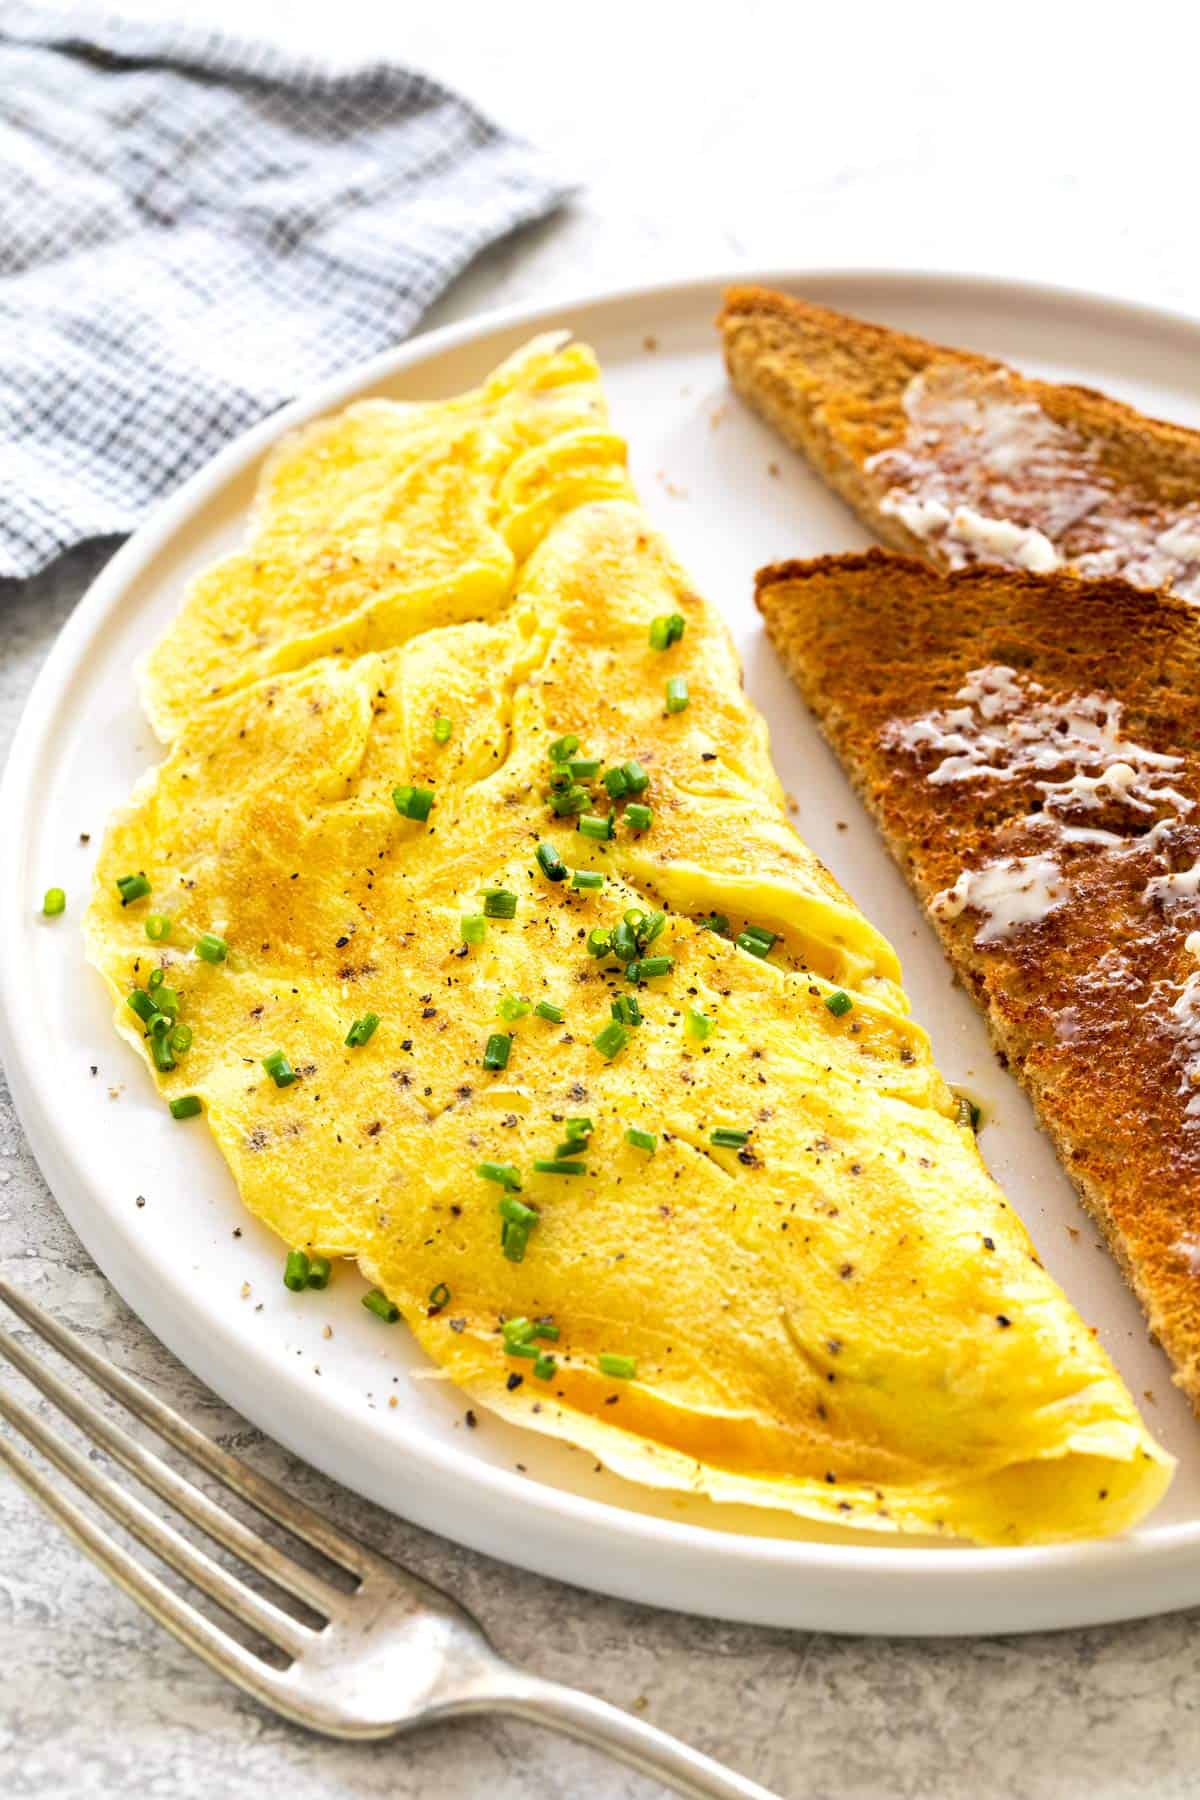 Creative DIY dinner ideas: Make your own omelets, with this tutorial at Jessica Gavin